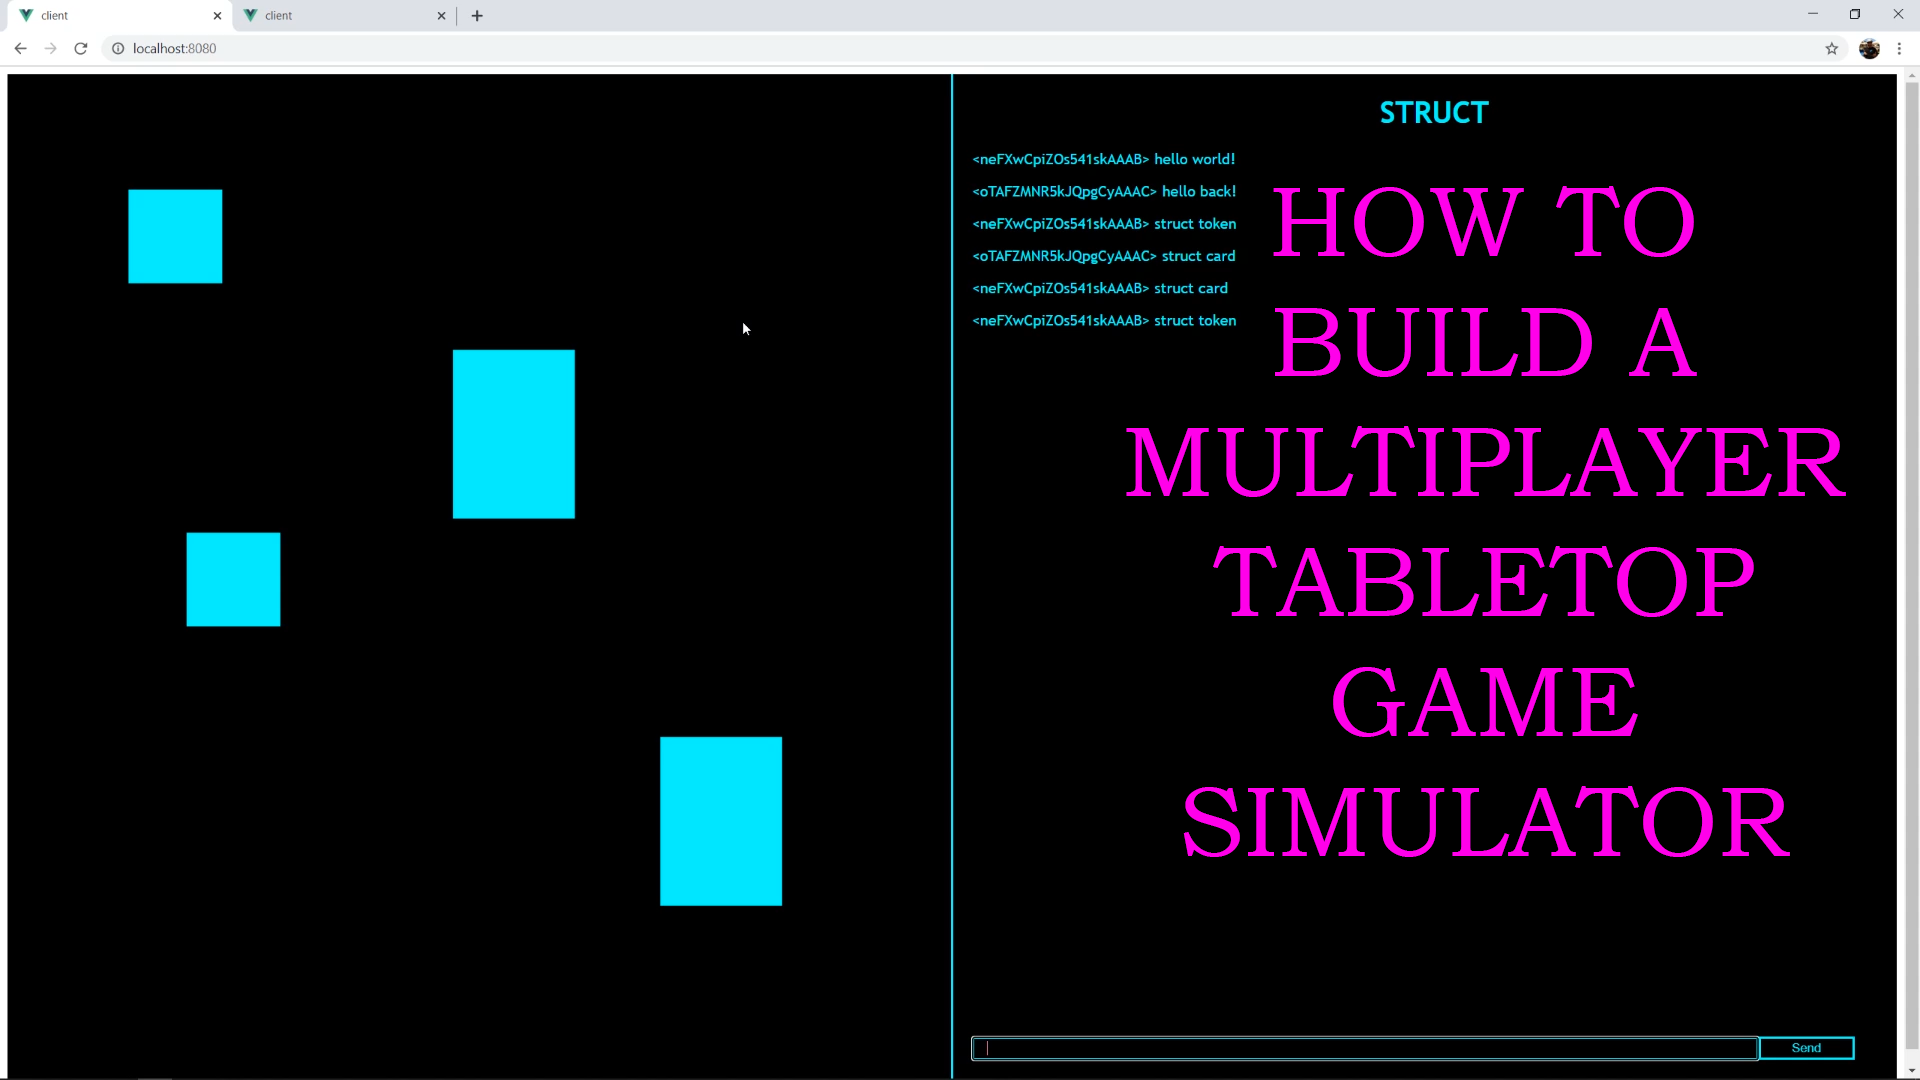 I made a collection of multiplayer browser games using Vue.js and